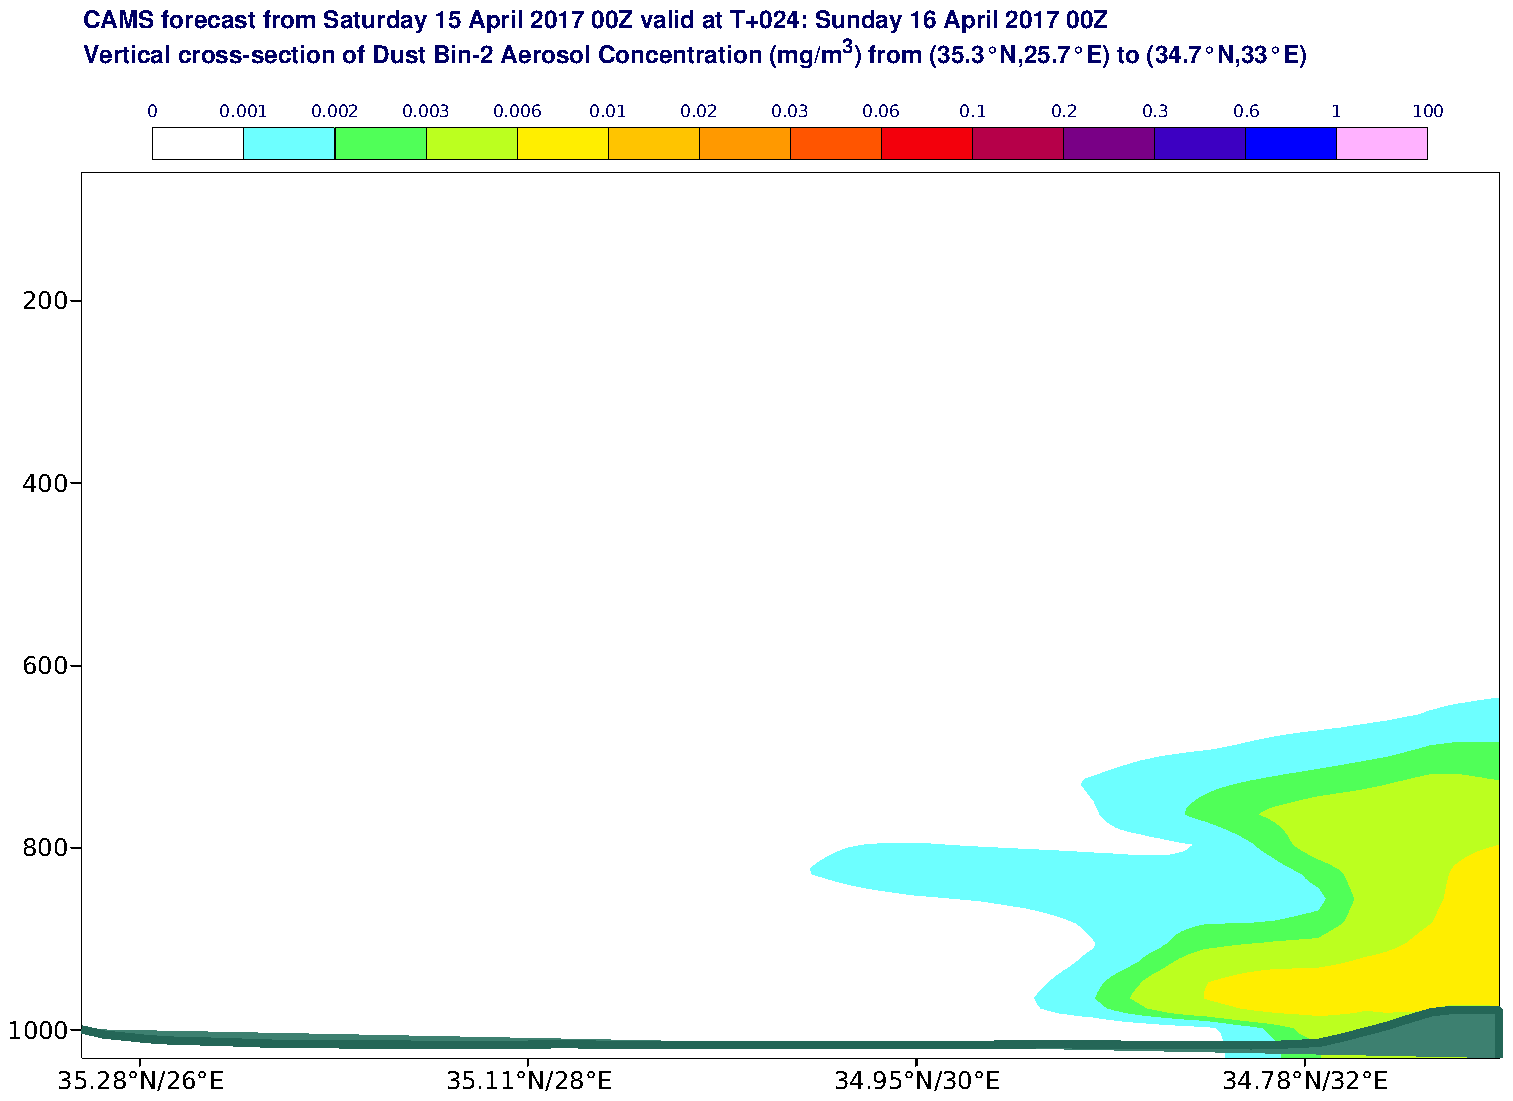 Vertical cross-section of Dust Bin-2 Aerosol Concentration (mg/m3) valid at T24 - 2017-04-16 00:00